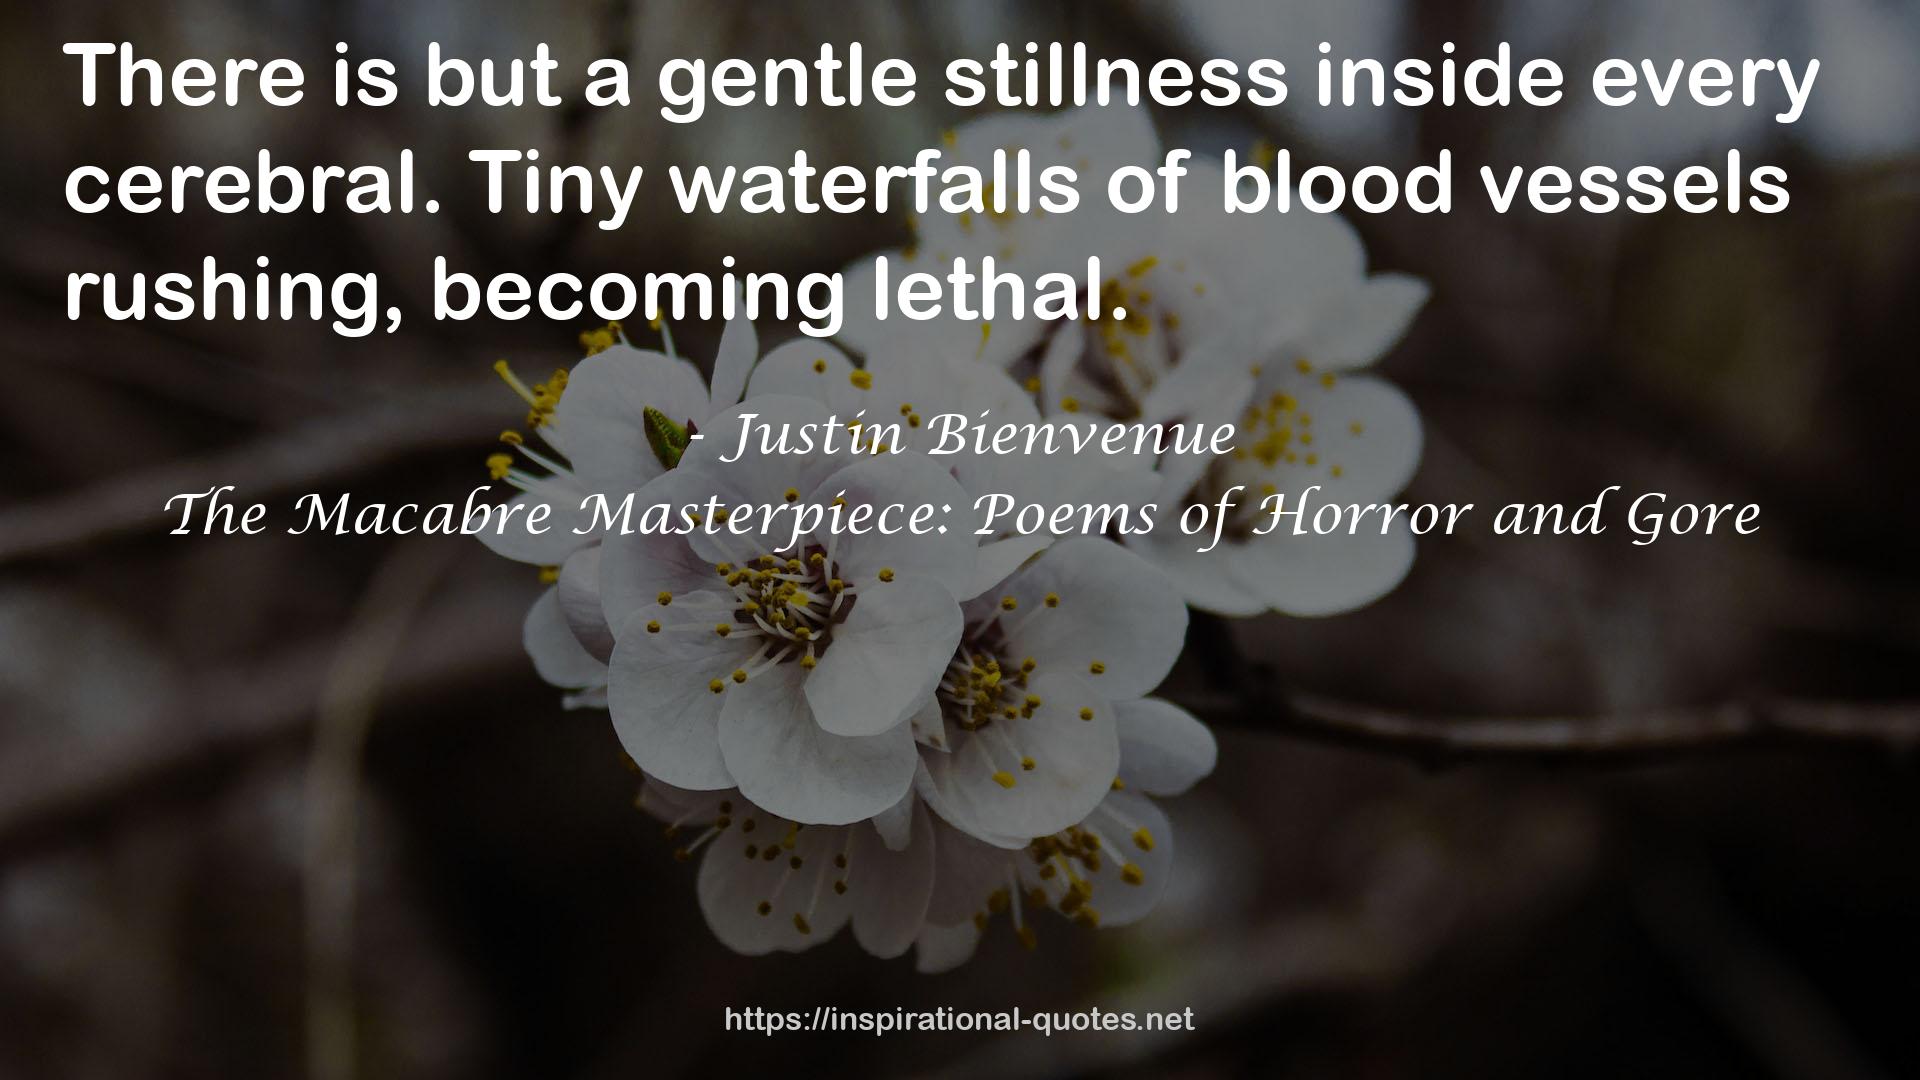 The Macabre Masterpiece: Poems of Horror and Gore QUOTES